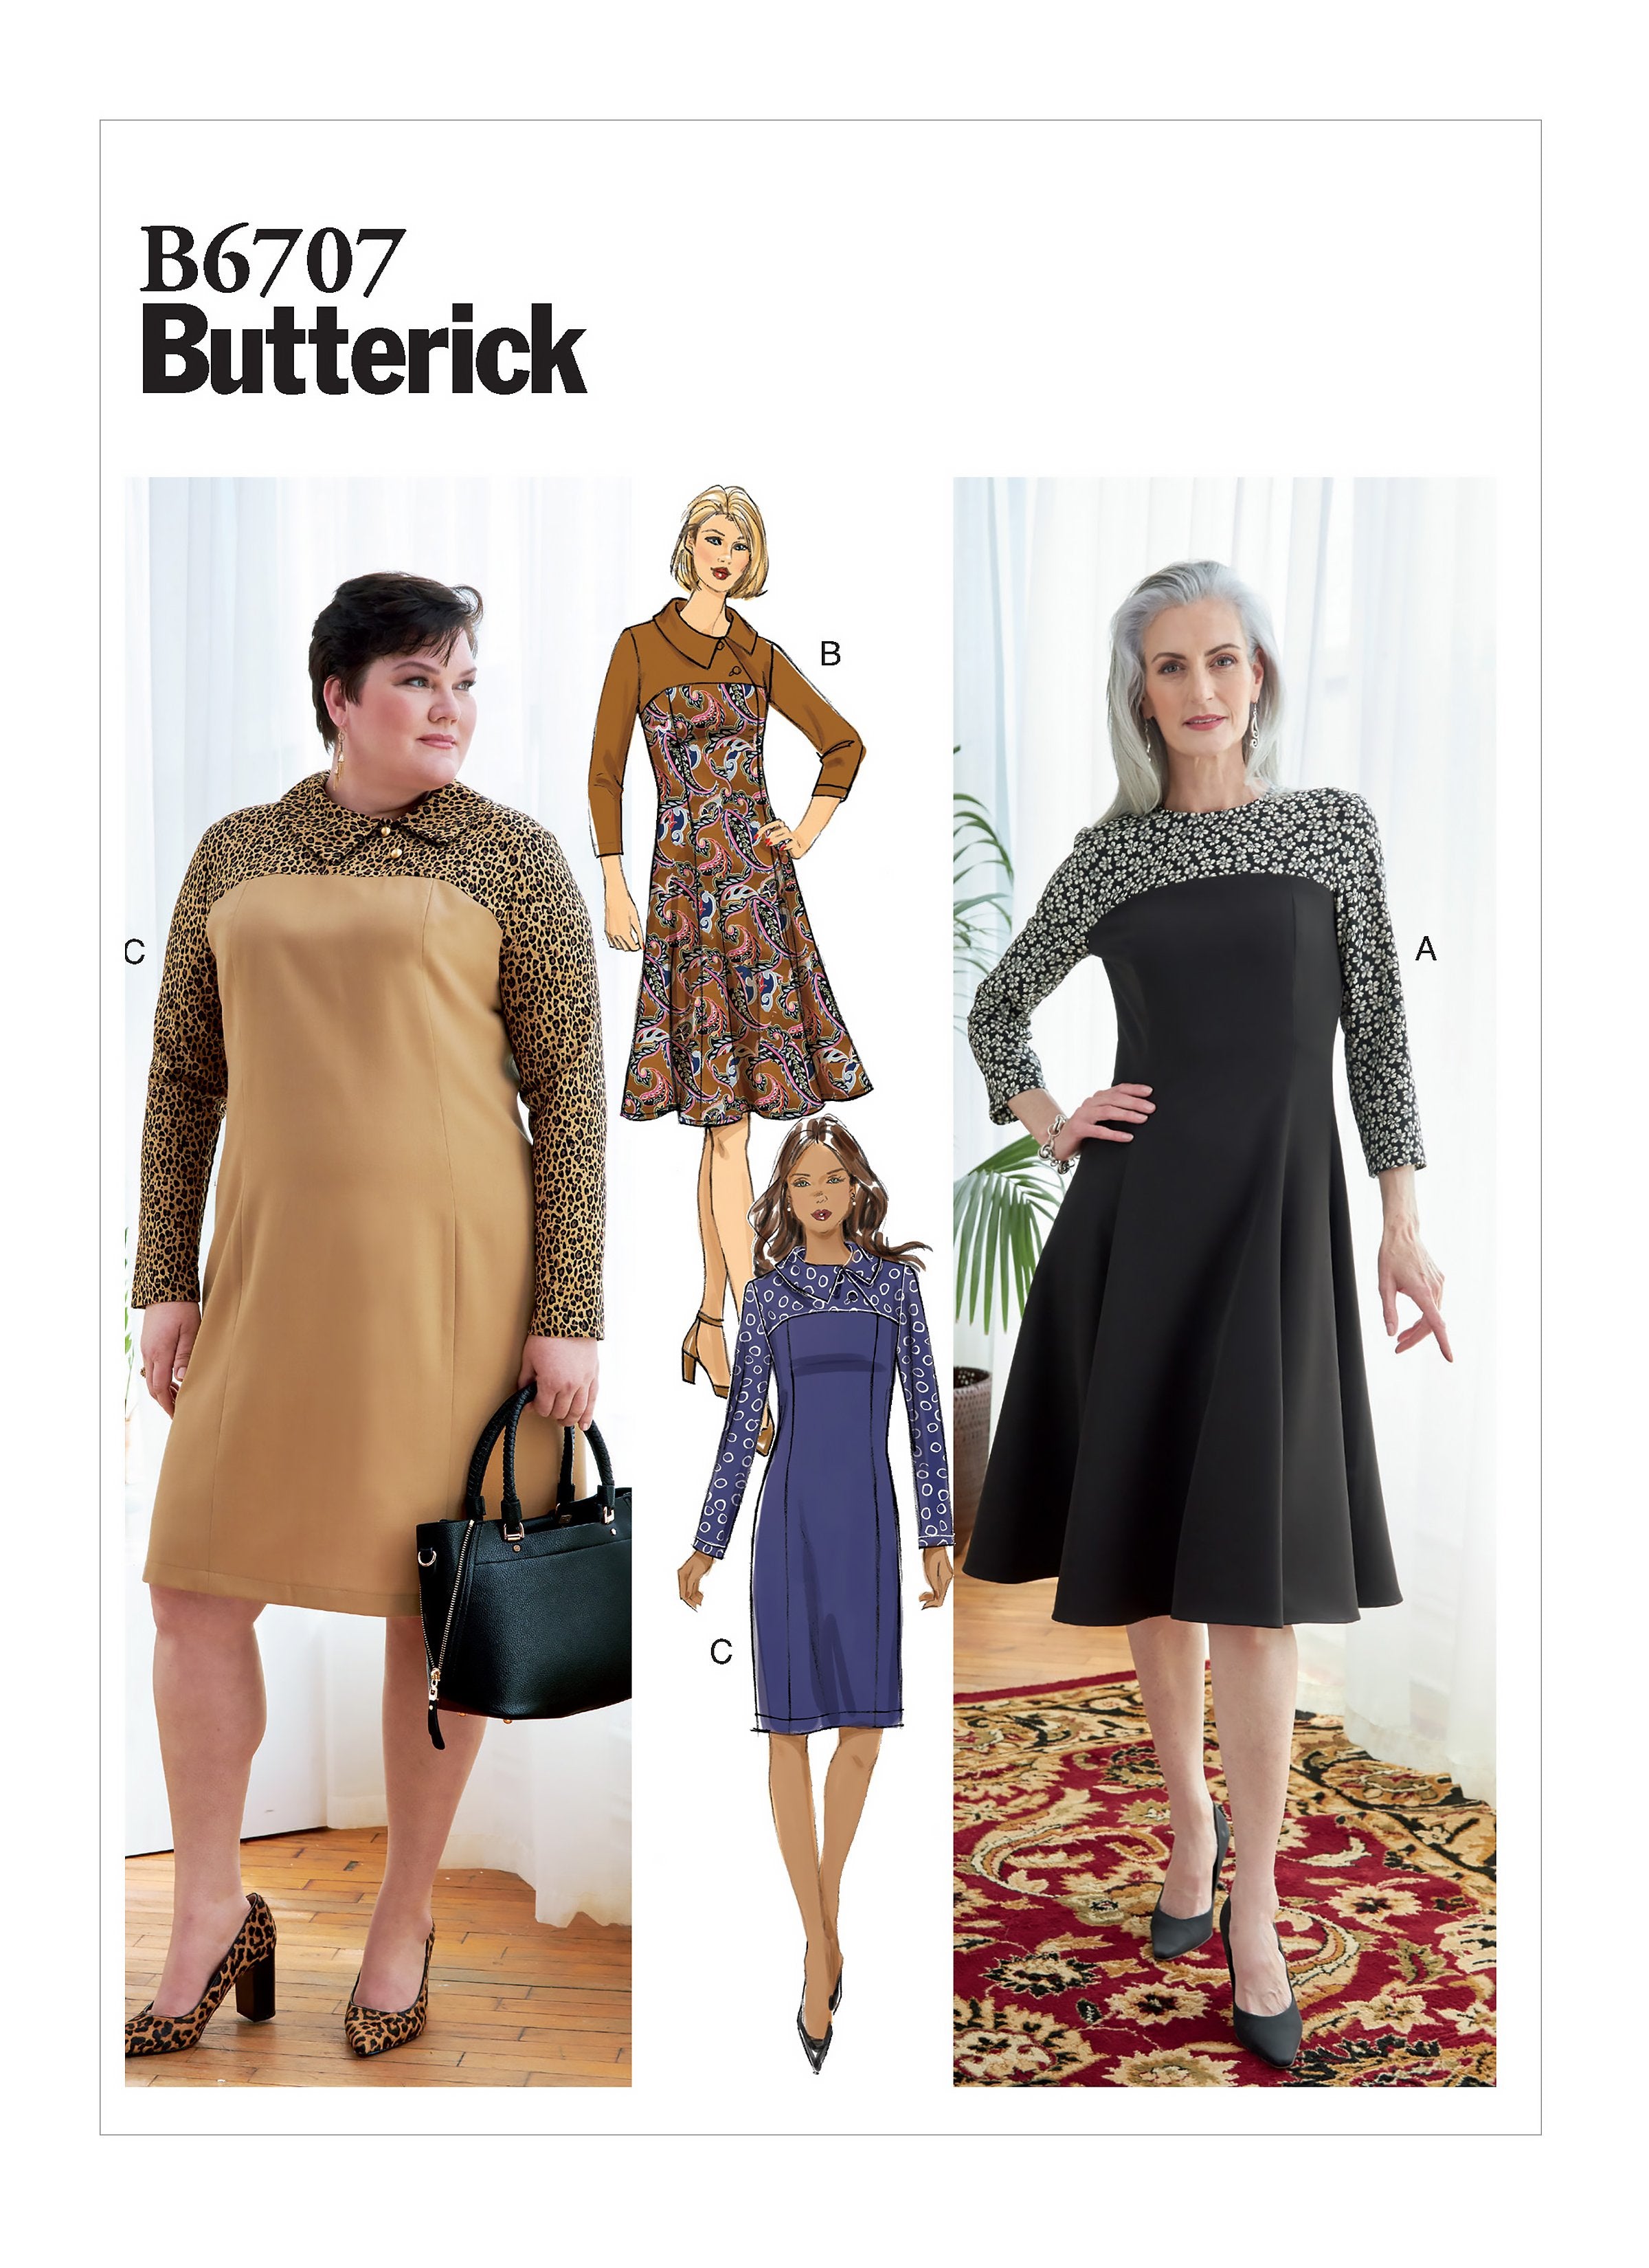 Butterick Sewing Pattern 6707 Misses / Women's Dress from Jaycotts Sewing Supplies